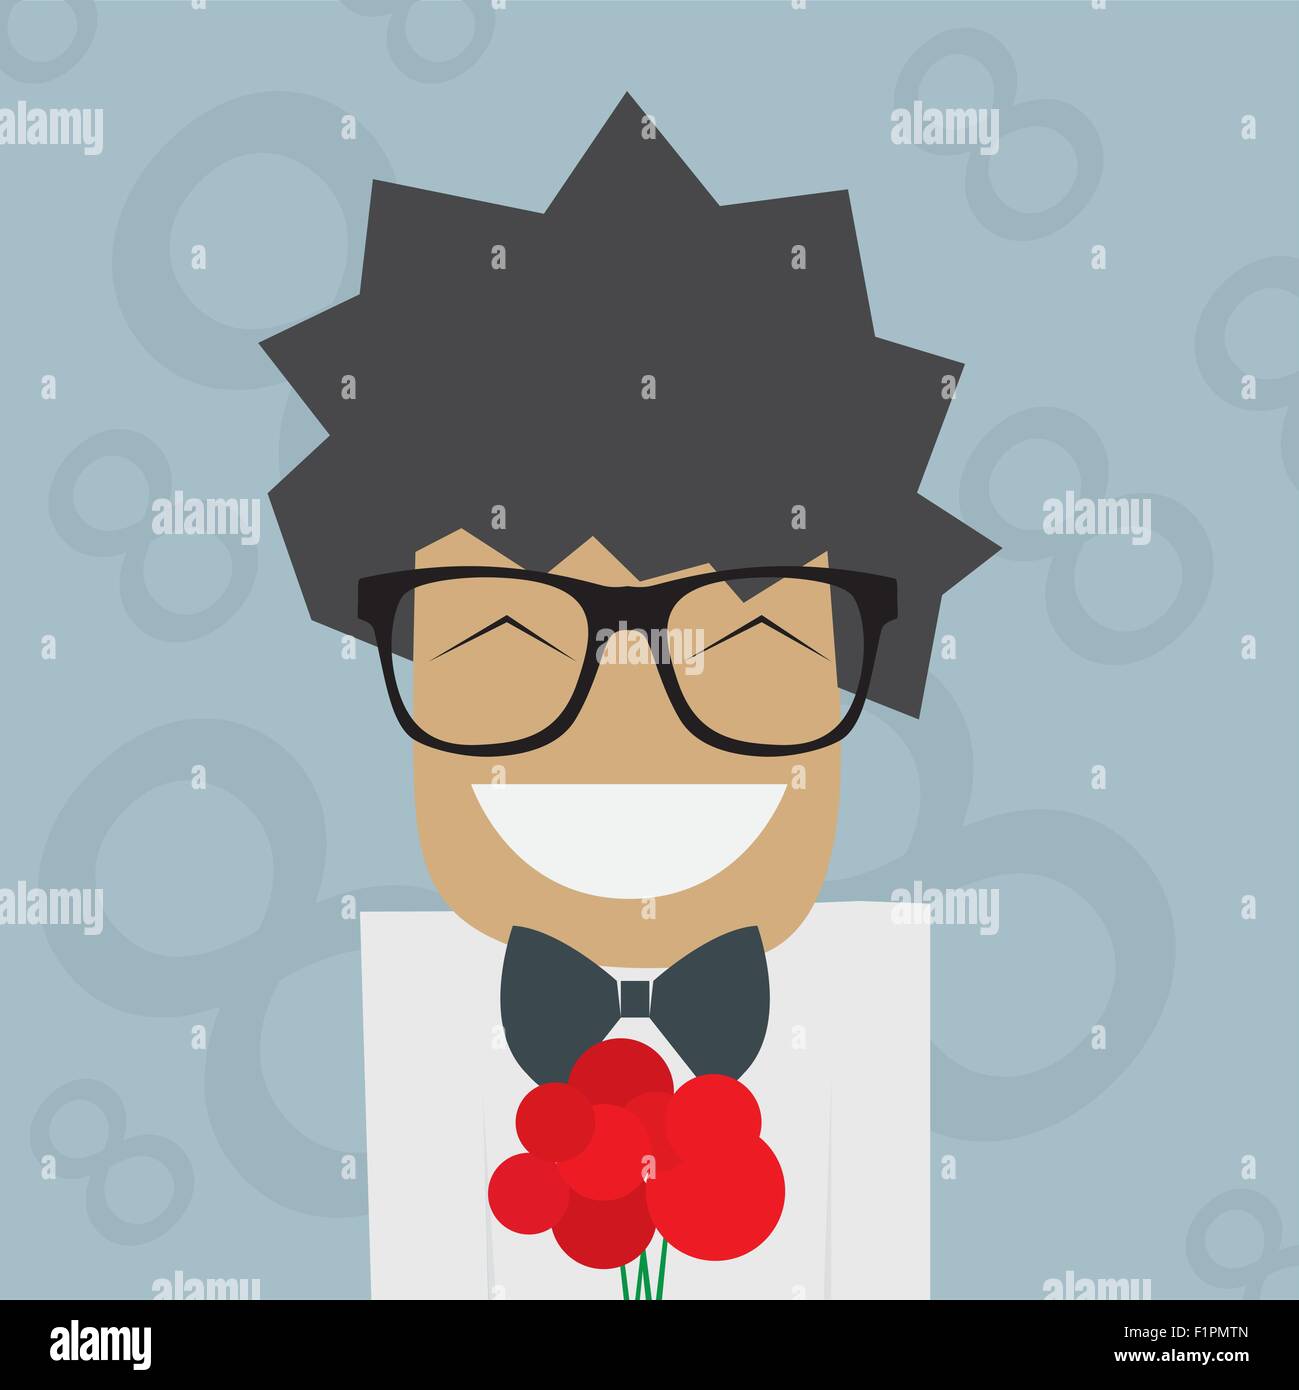 Smiled Man in glasses with red flowers Vector illustration Stock Vector